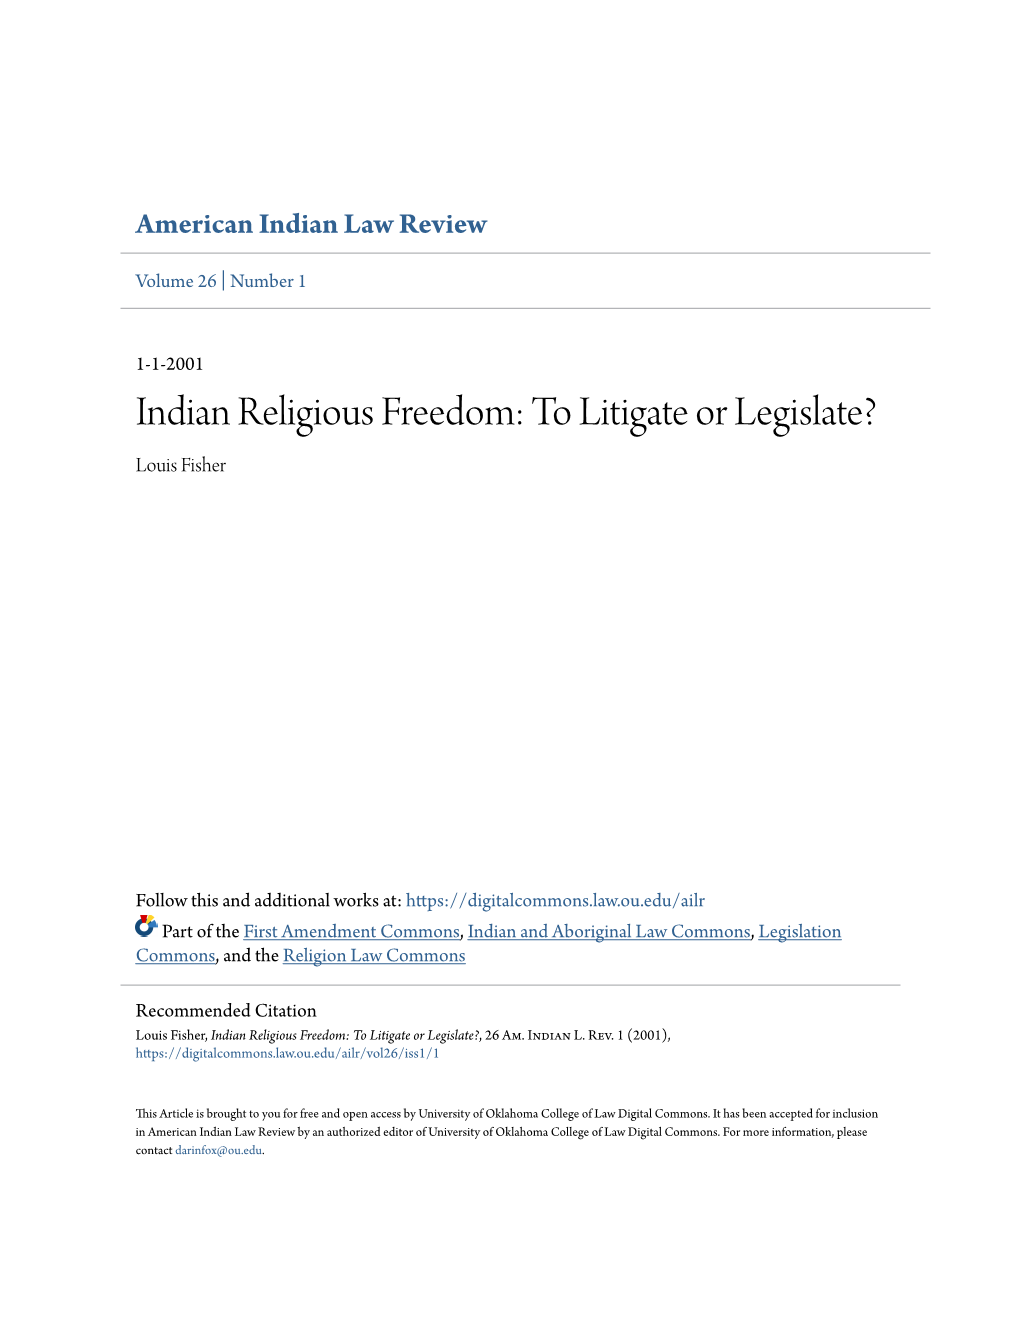 Indian Religious Freedom: to Litigate Or Legislate? Louis Fisher